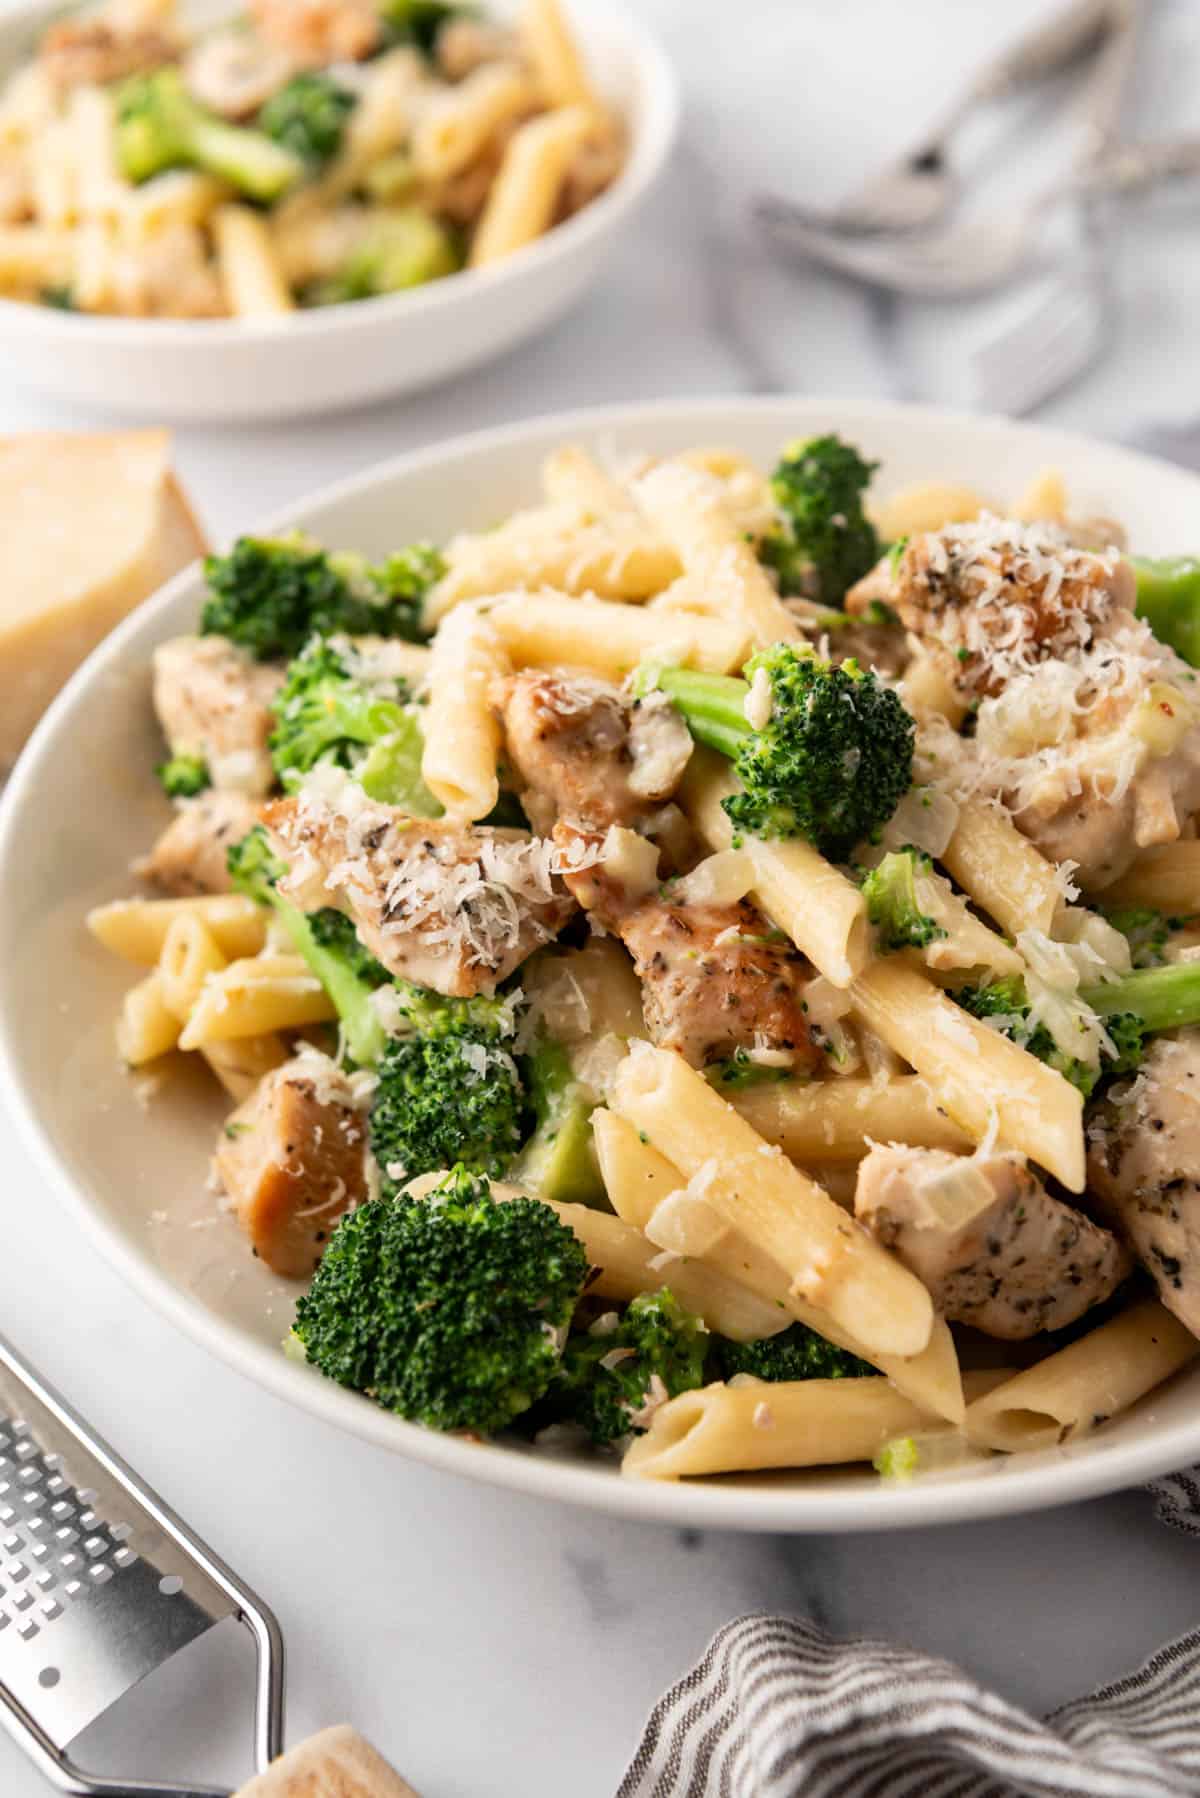 An image of a white pasta bowl filled with chicken broccoli pasta.